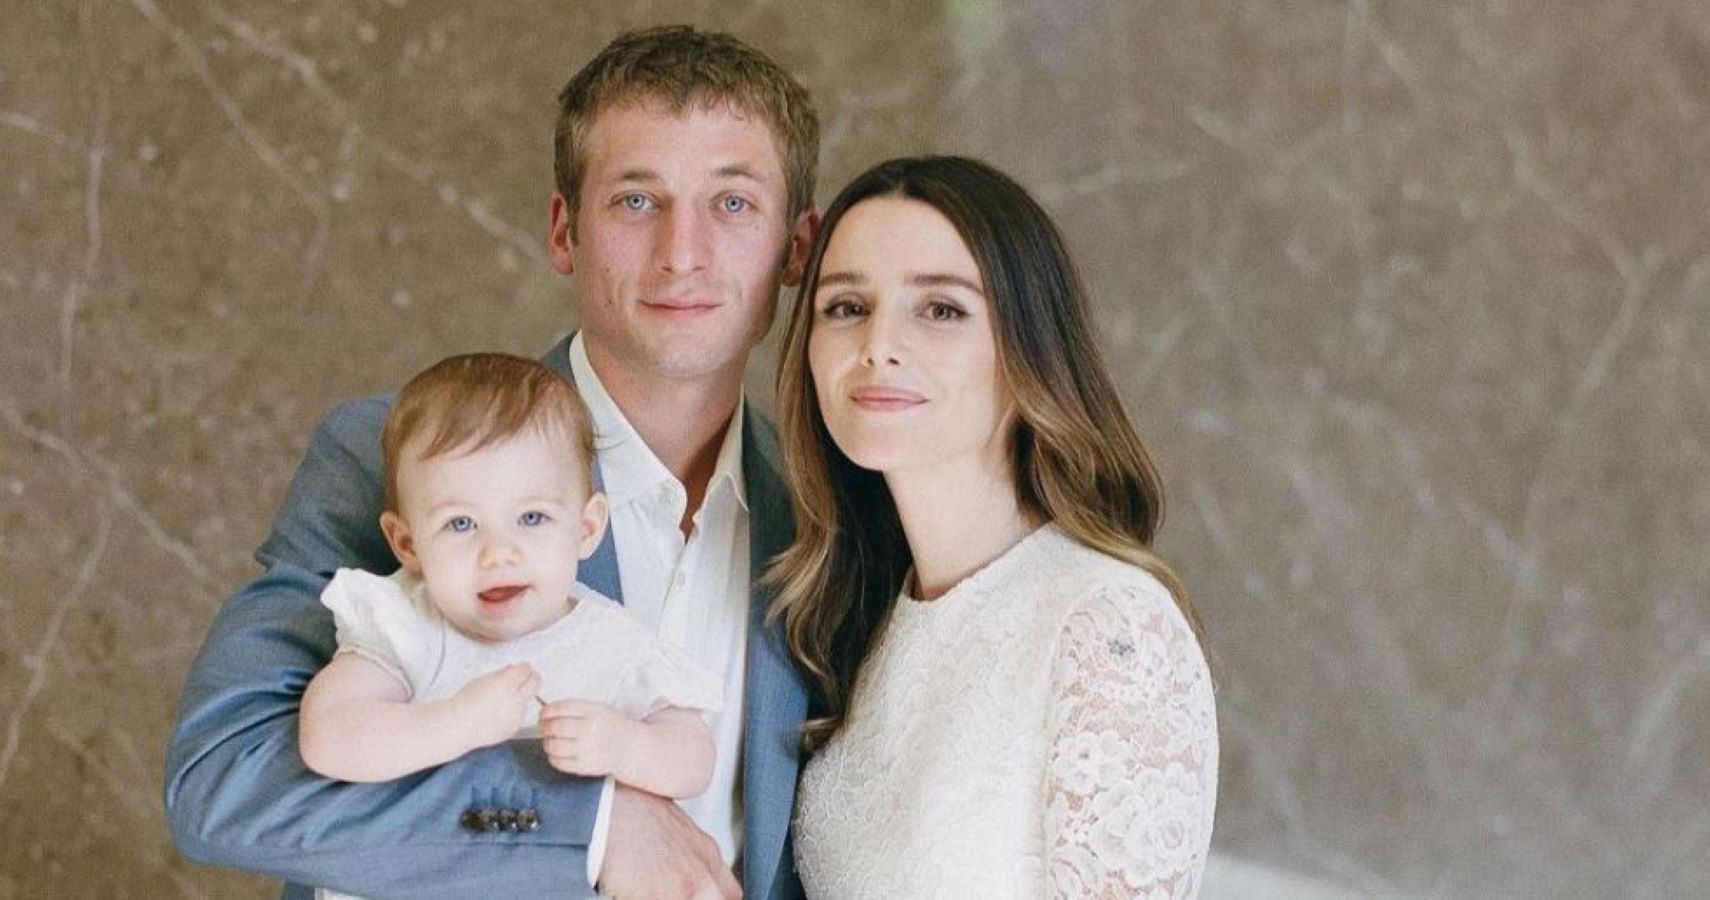 Jeremy Allen White and Addison Timlin welcome second child